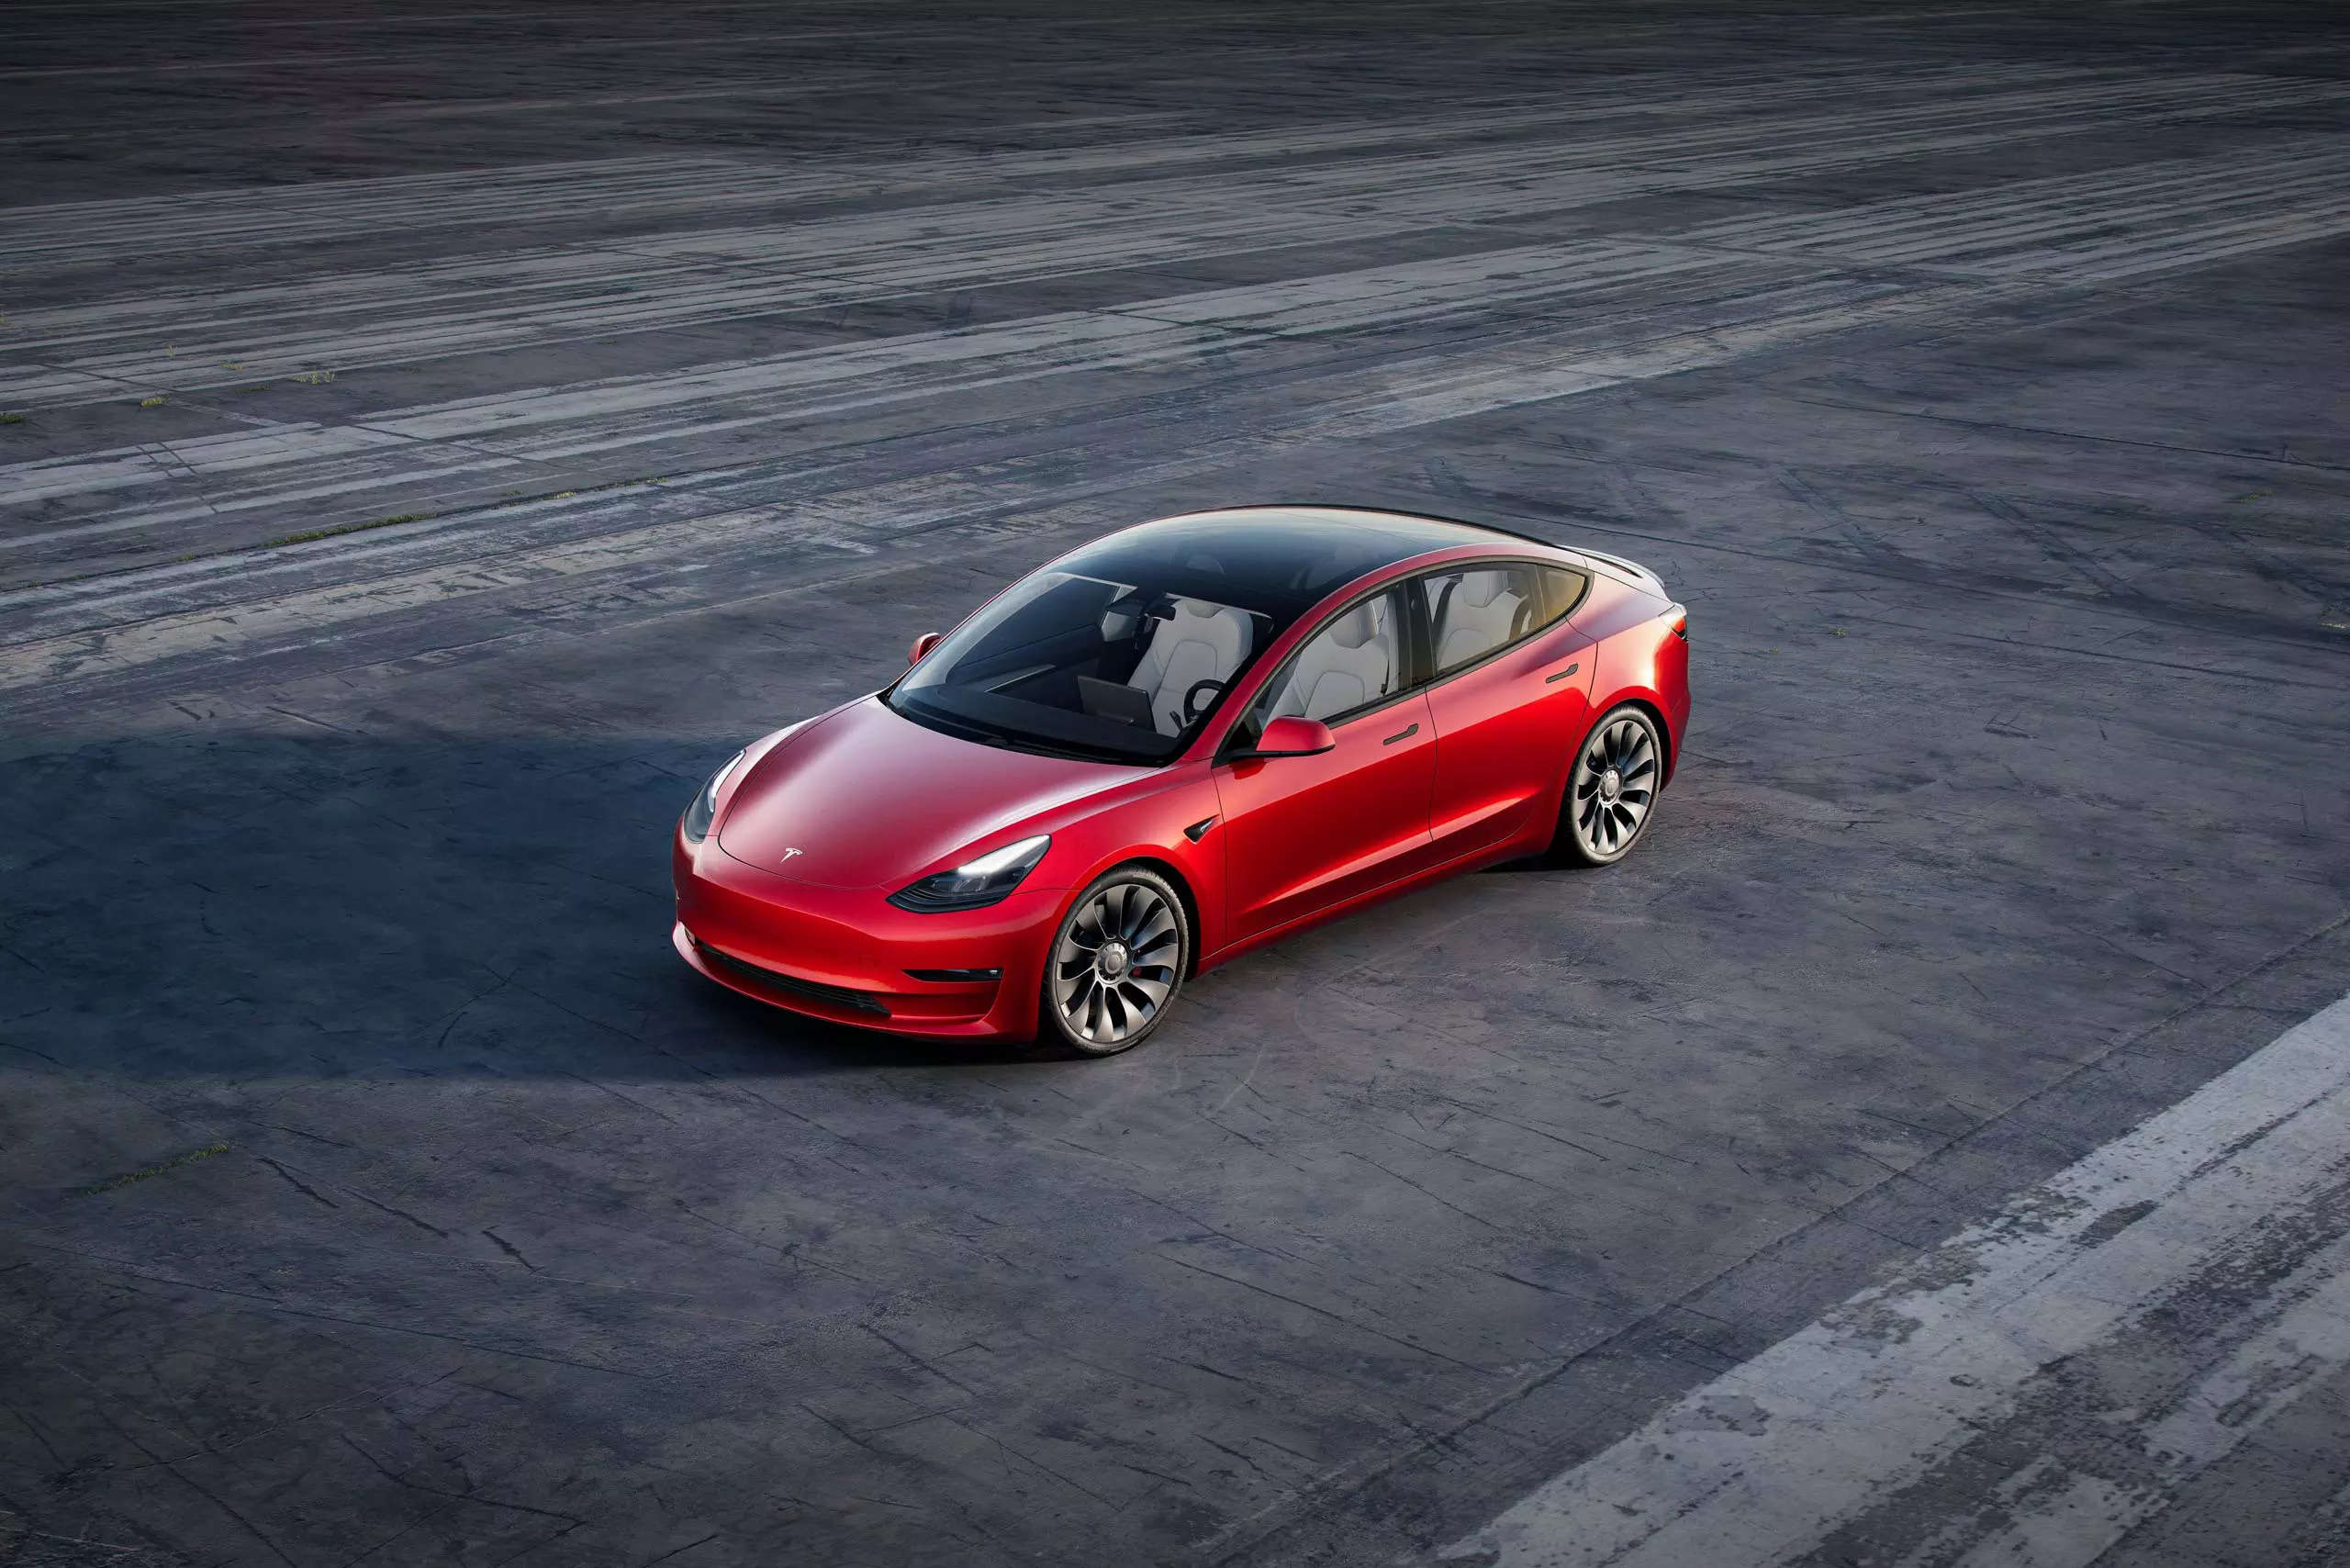 Tesla readies revamped Model 3 with project 'Highland': Sources, ET Auto